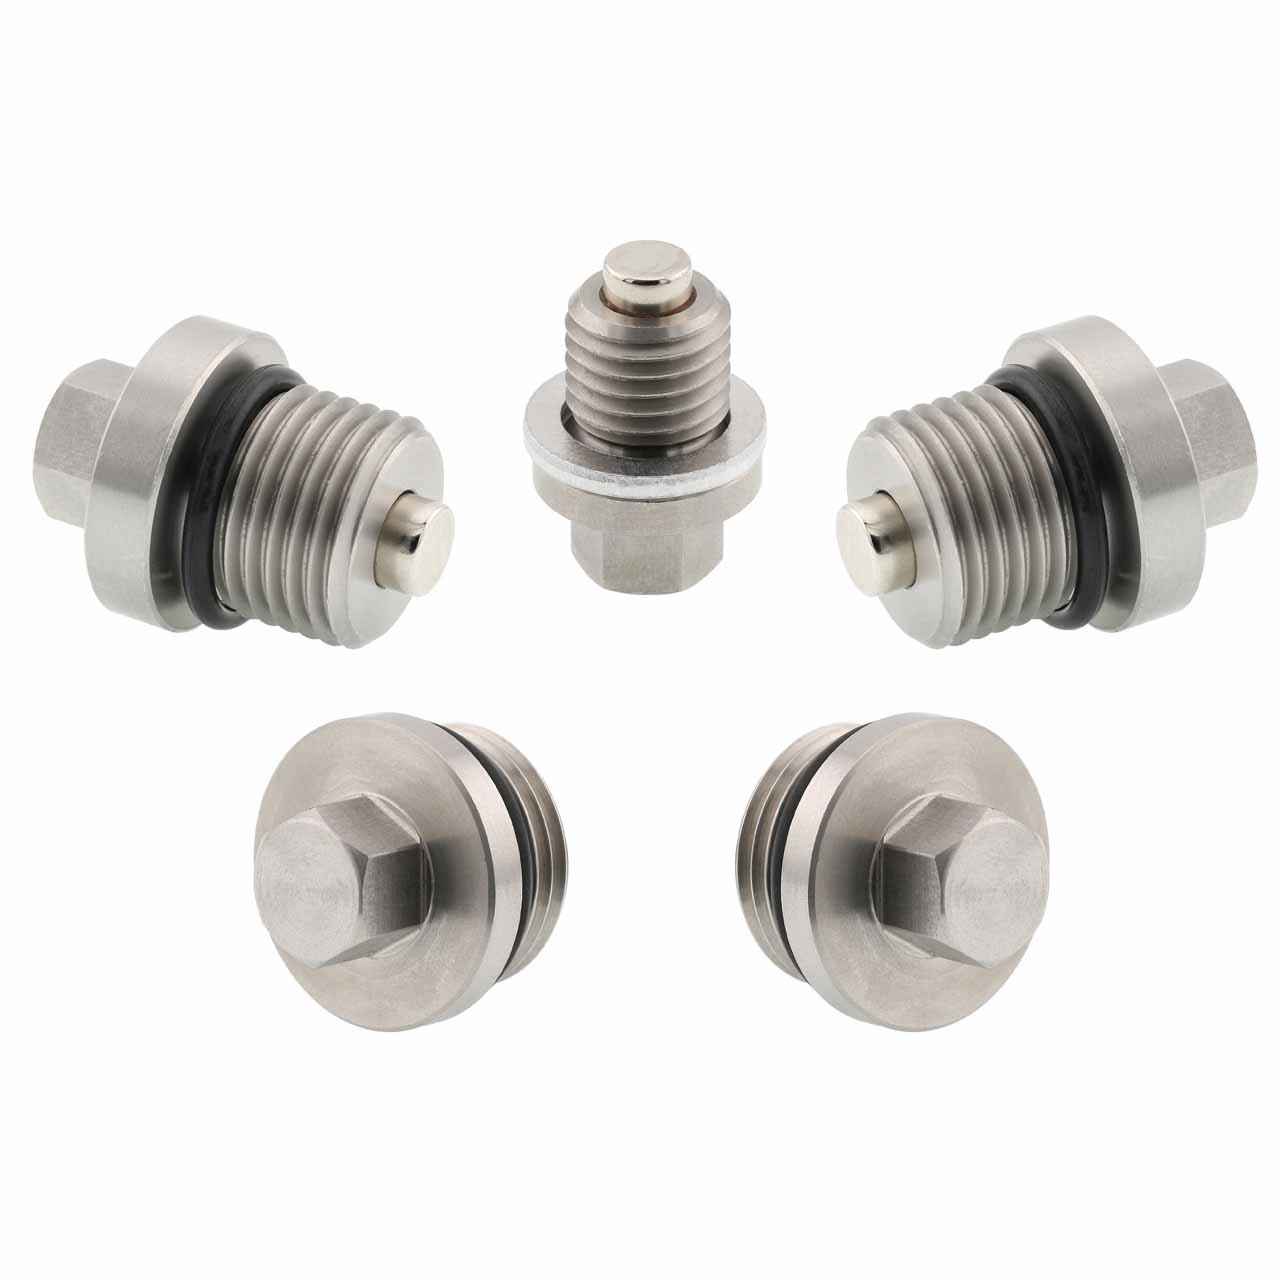 Polaris RZR XP 1000 EPS Magnetic Oil Drain Plug Kit - 2014-2019 - Engine, Transmission, Differential - Made In USA